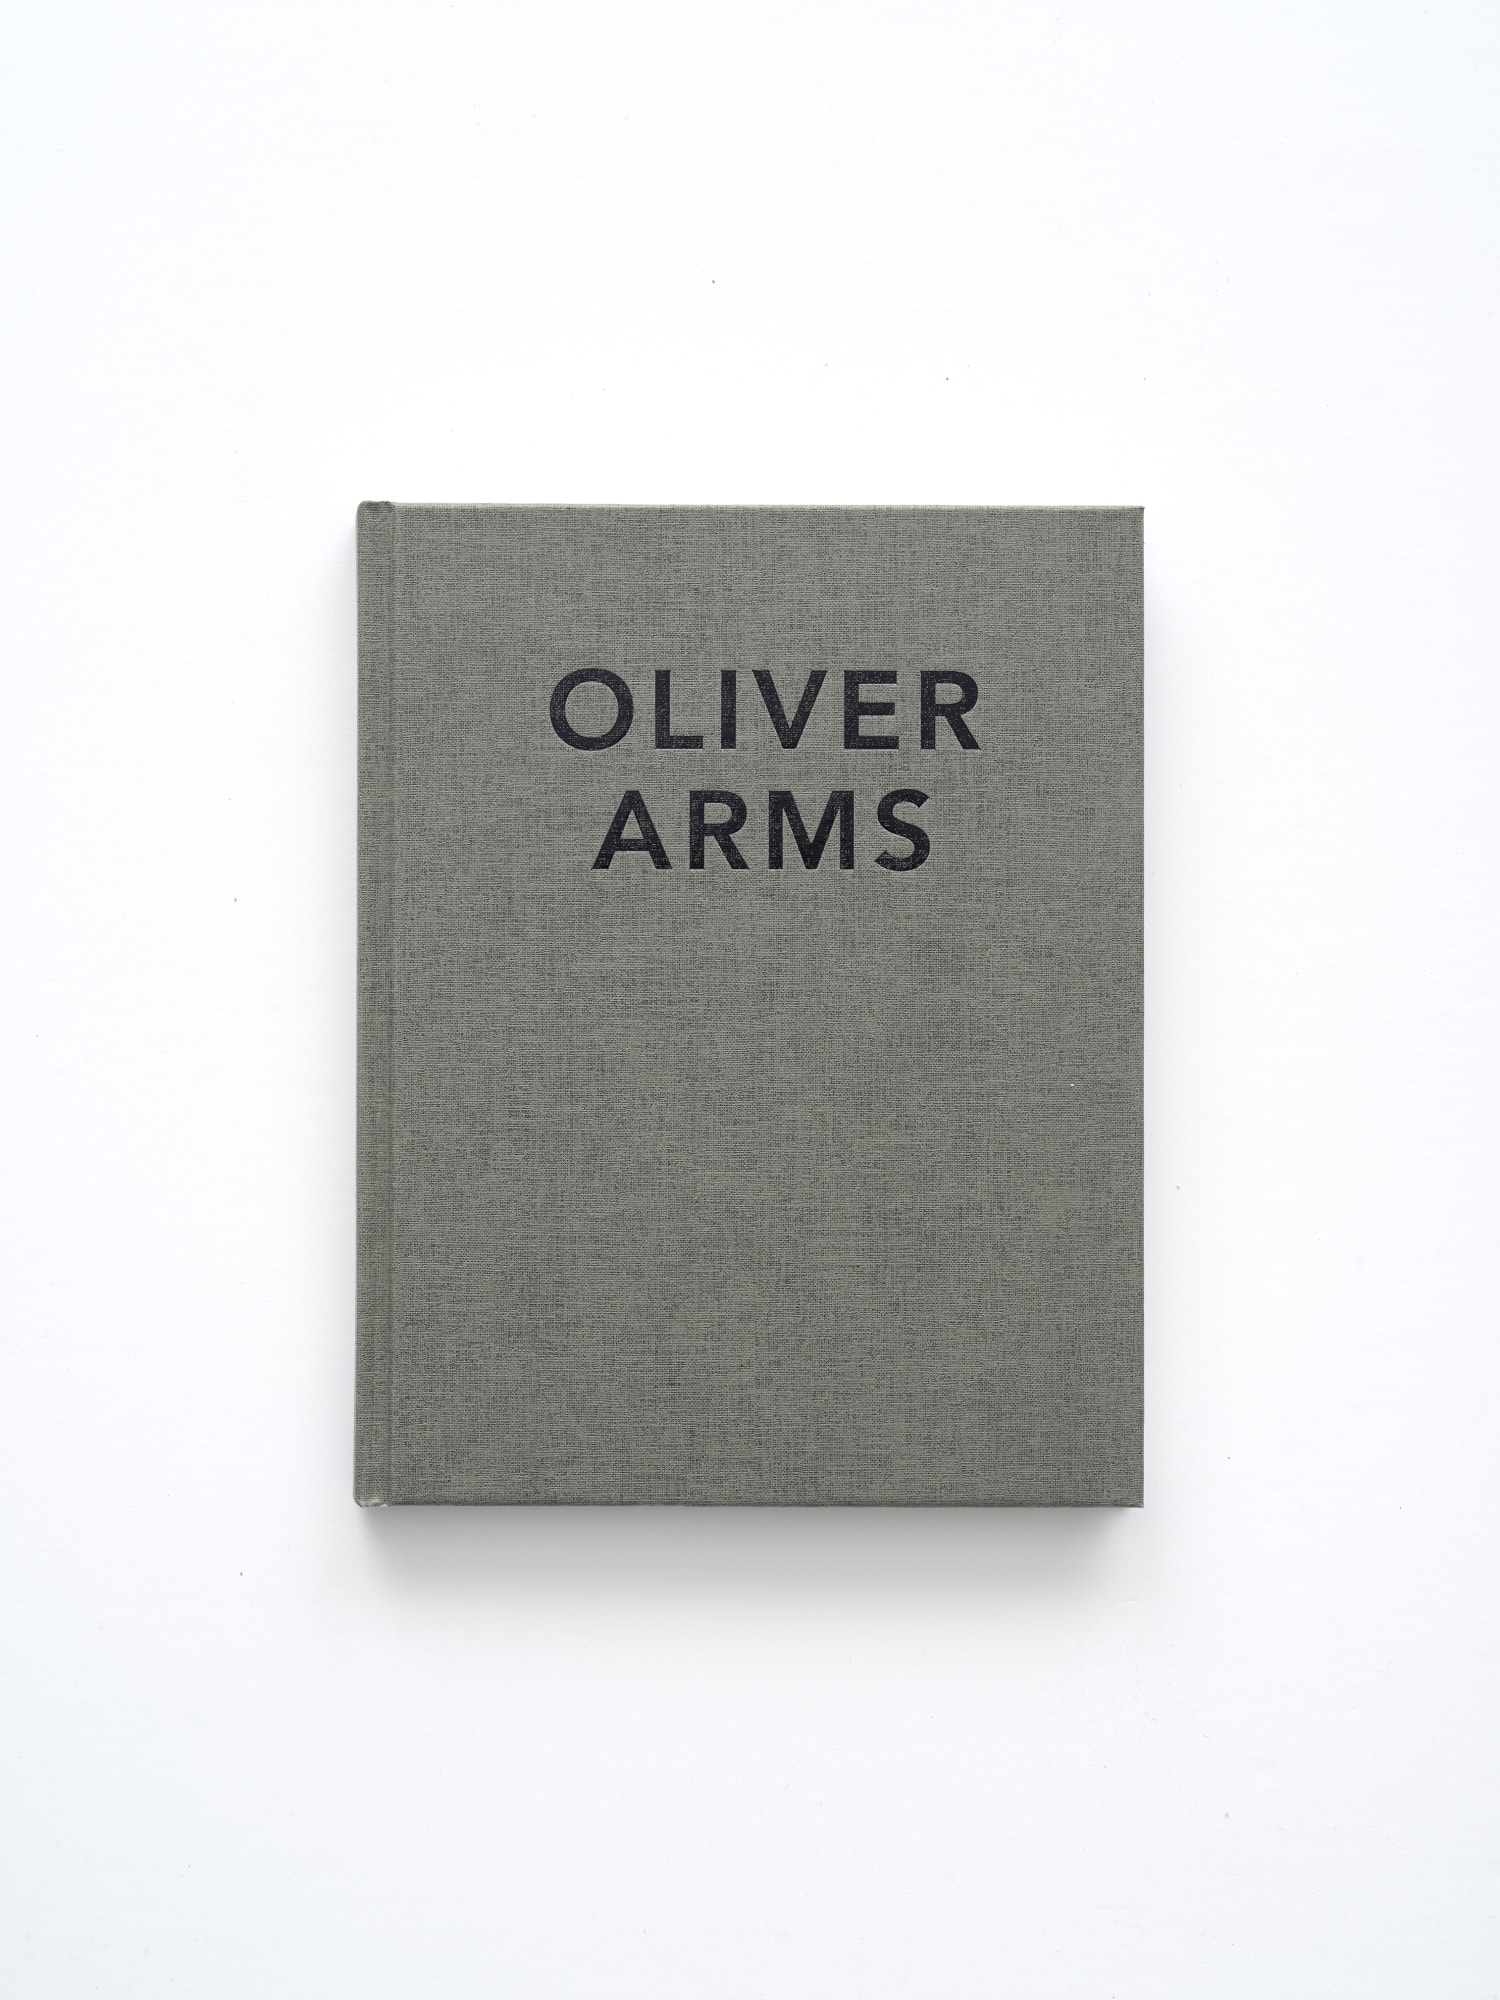 Oliver Arms